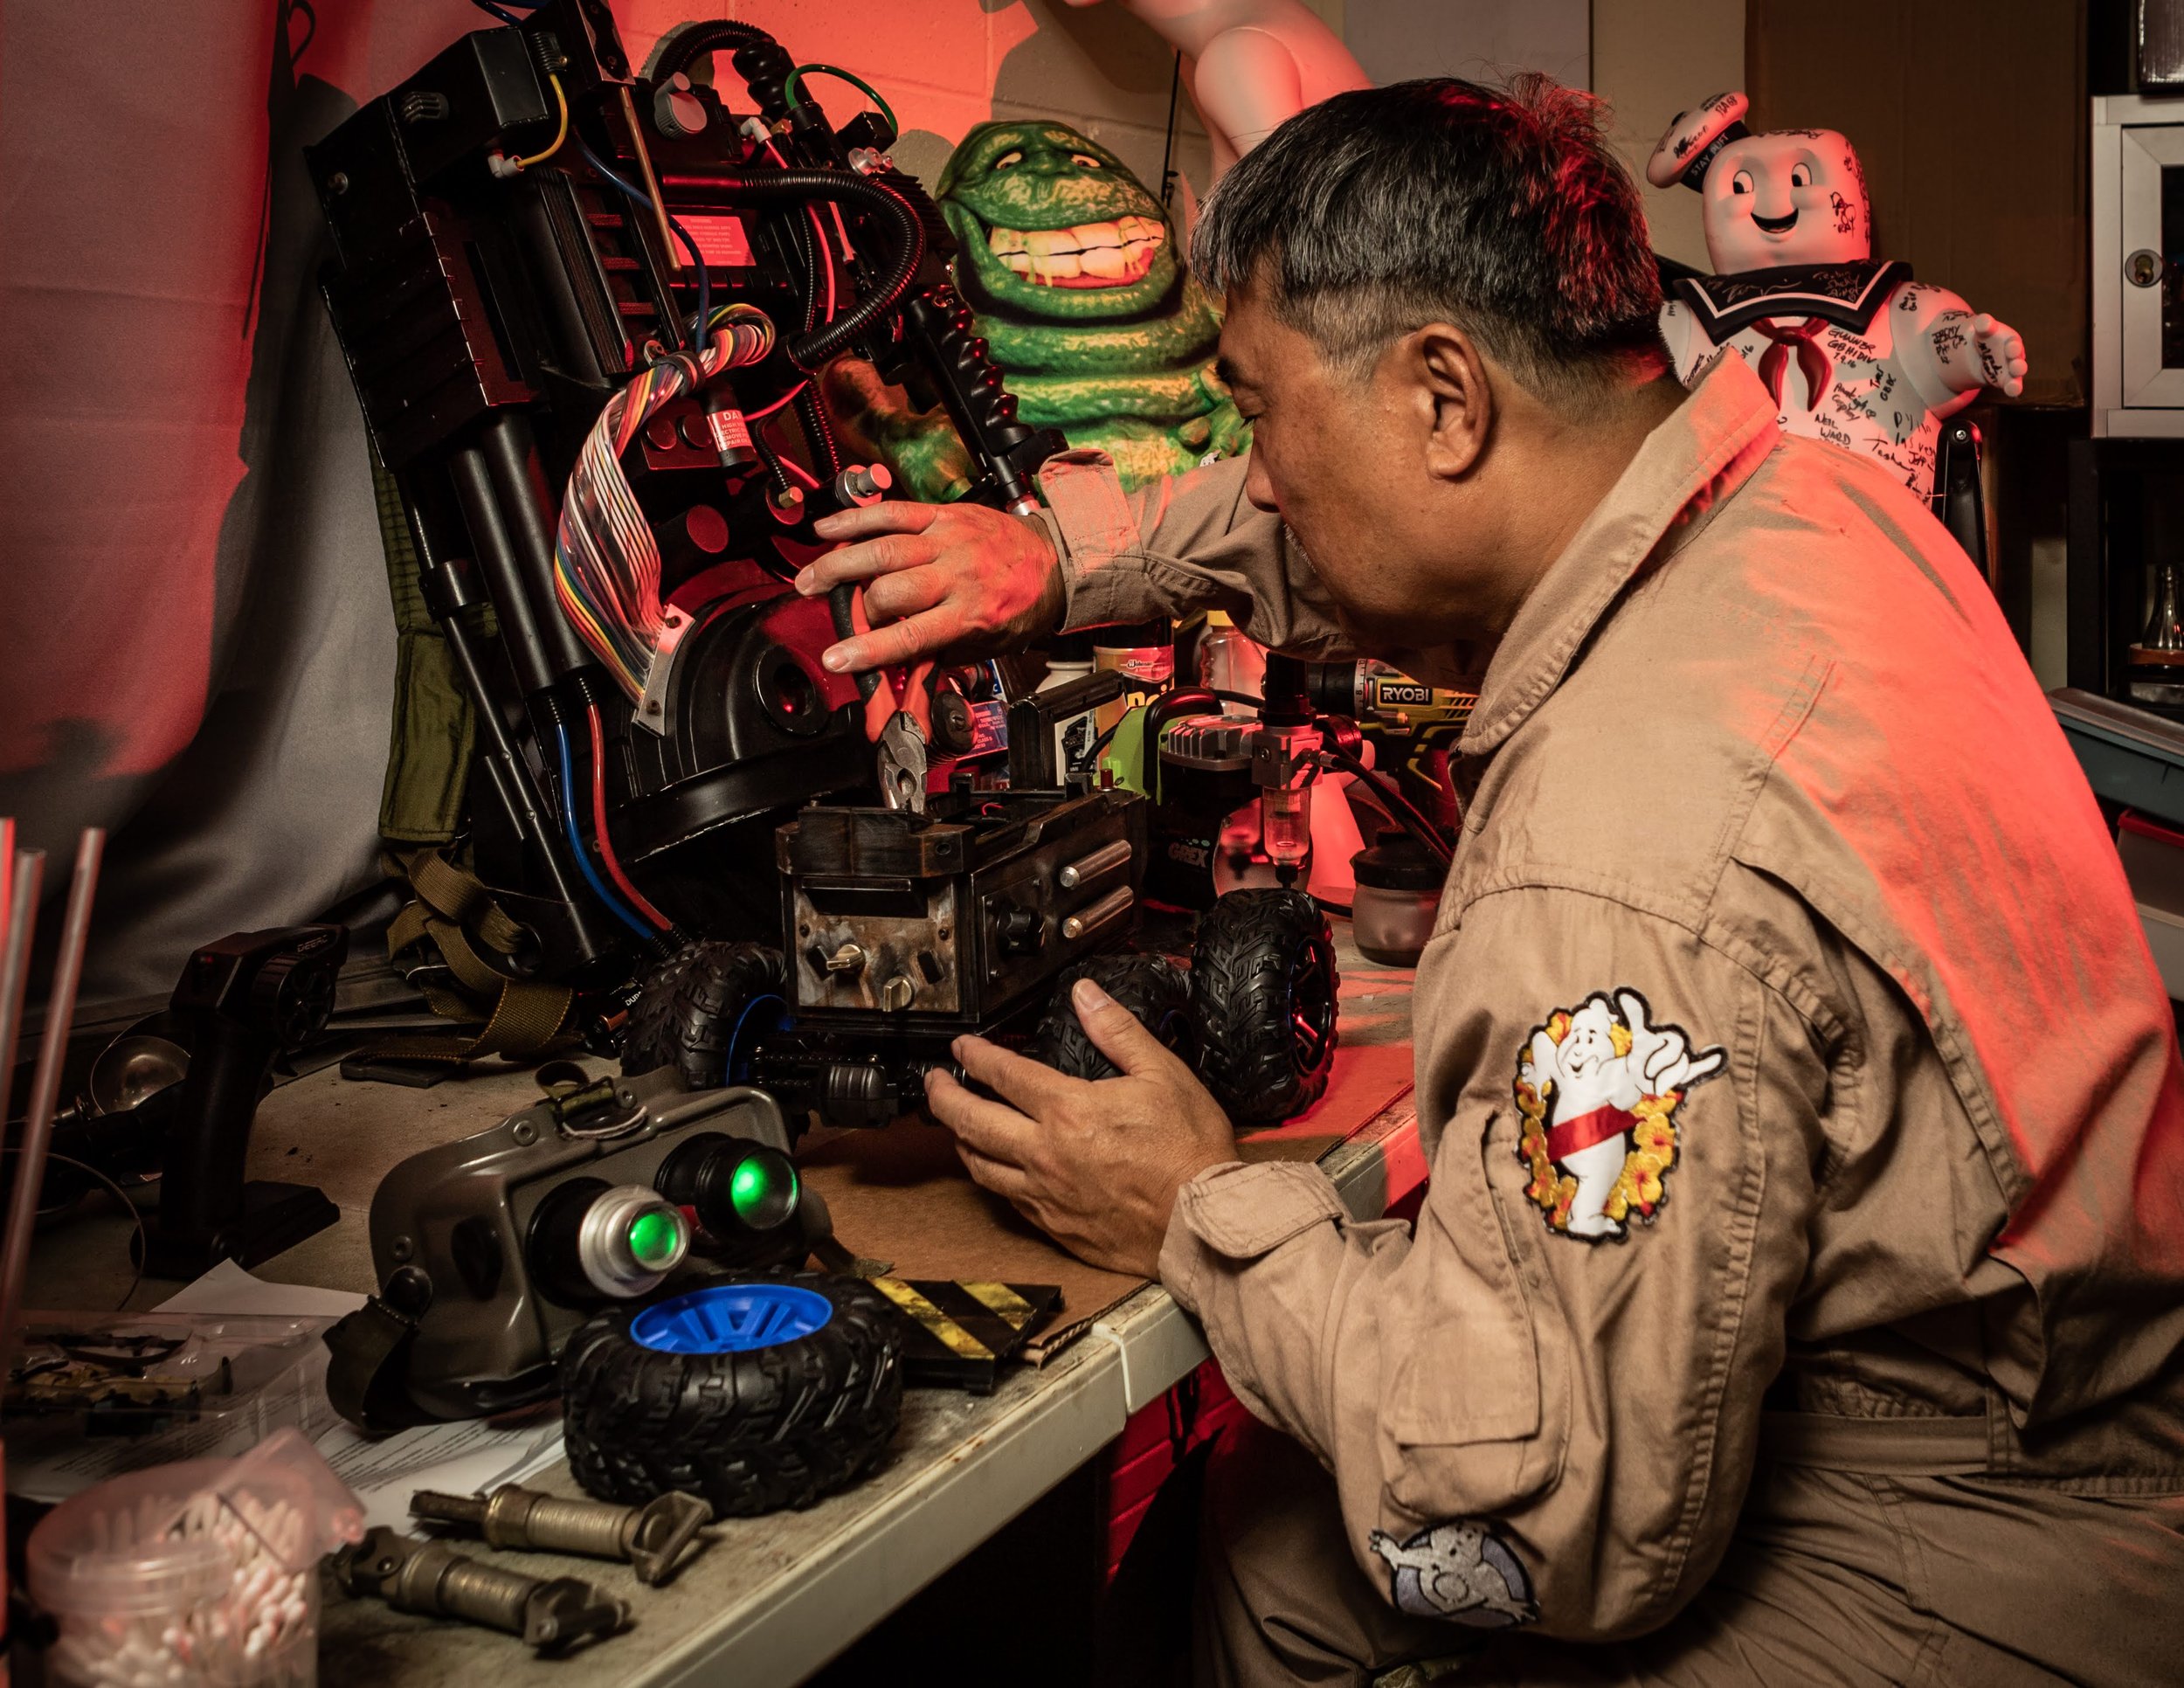  Okamoto proudly sports his prized Ghostbuster uniform, while sifting through his sentimental stash of prized film memorabilia, including proton packs, motion trackers, and more.   